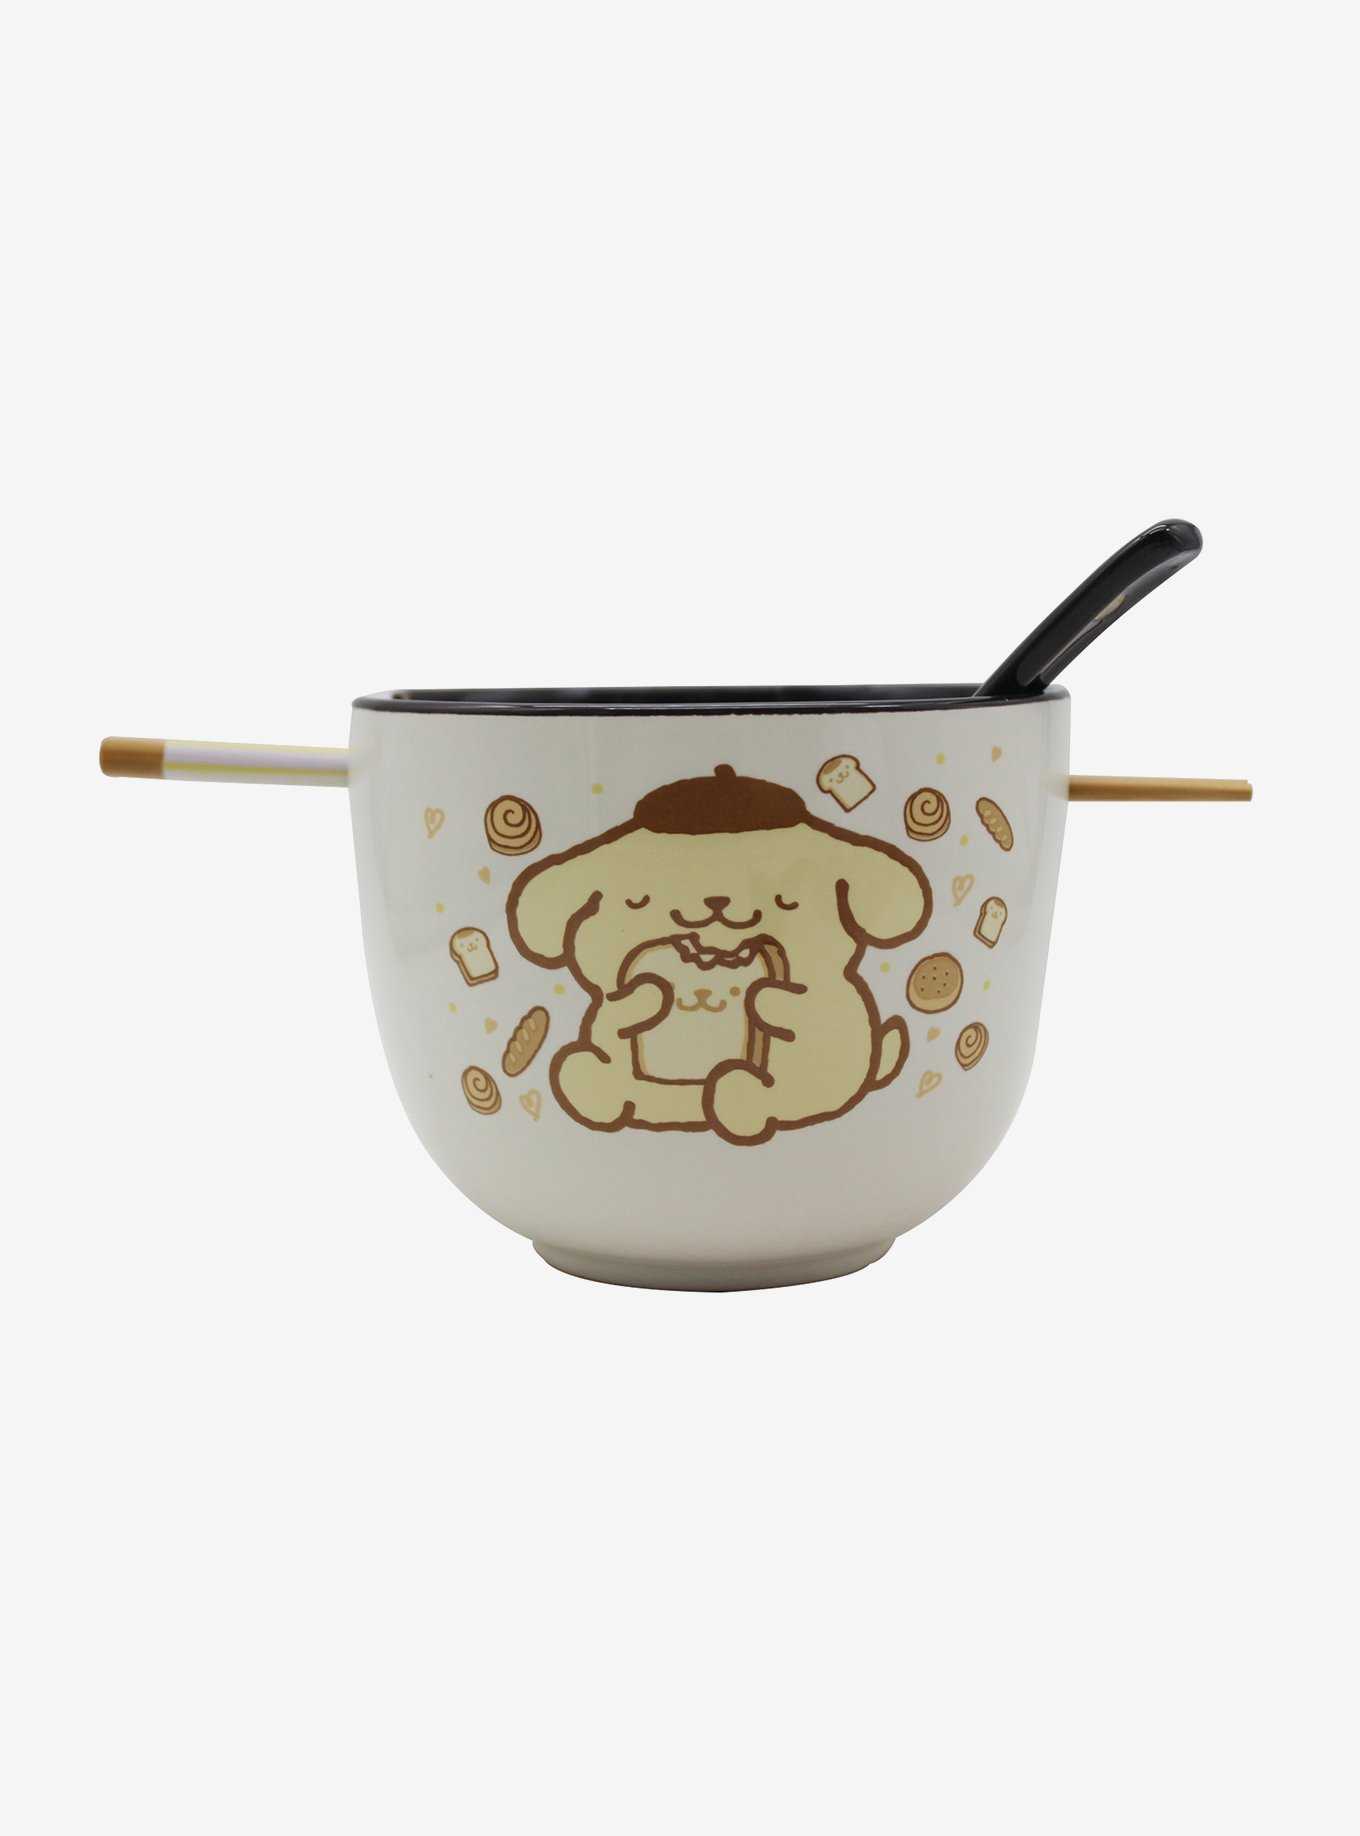  Anime One Piece Ramen Bowl Set with Chopsticks - Luffy Straw  Hat Design for Noodles, Udon, Snacks, and More - One Piece Gift for Anime  Fans and Christmas - Ceramic 